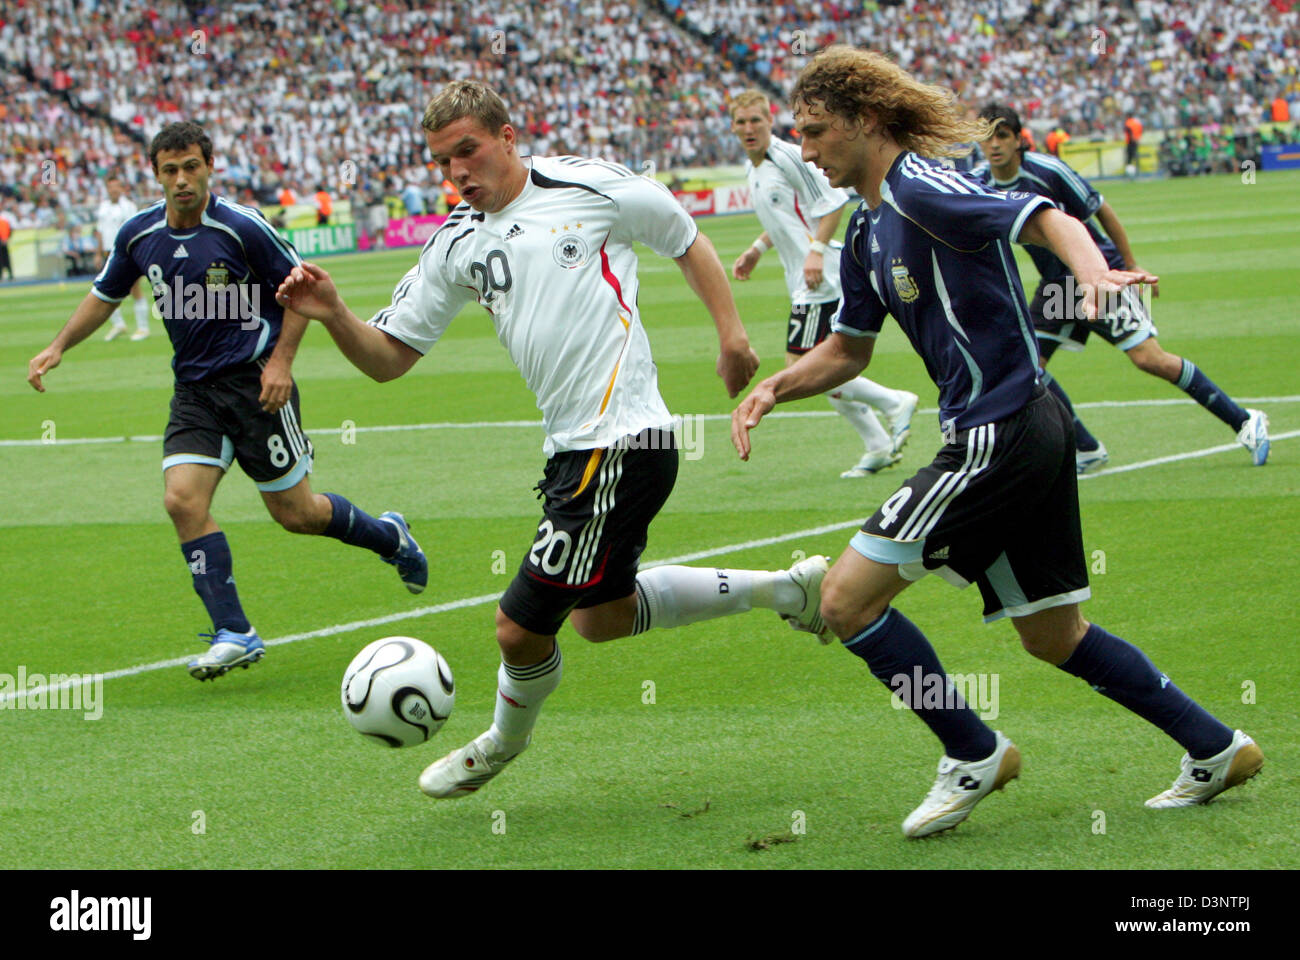 German striker Lukas Podolski (C) of Germany is faster than Javier Mascherano (L) and Fabricio Coloccini (R) of Argentina during the 2006 FIFA World Cup quarter-finals match Germany vs Argentina in the Olympic Stadium in Berlin, Germany, Friday 30 June 2006. DPA/THOMAS EISENHUTH +++ Mobile Services OUT +++ Please refer to FIFA's Terms and Conditions. +++(c) dpa - Bildfunk+++ Stock Photo